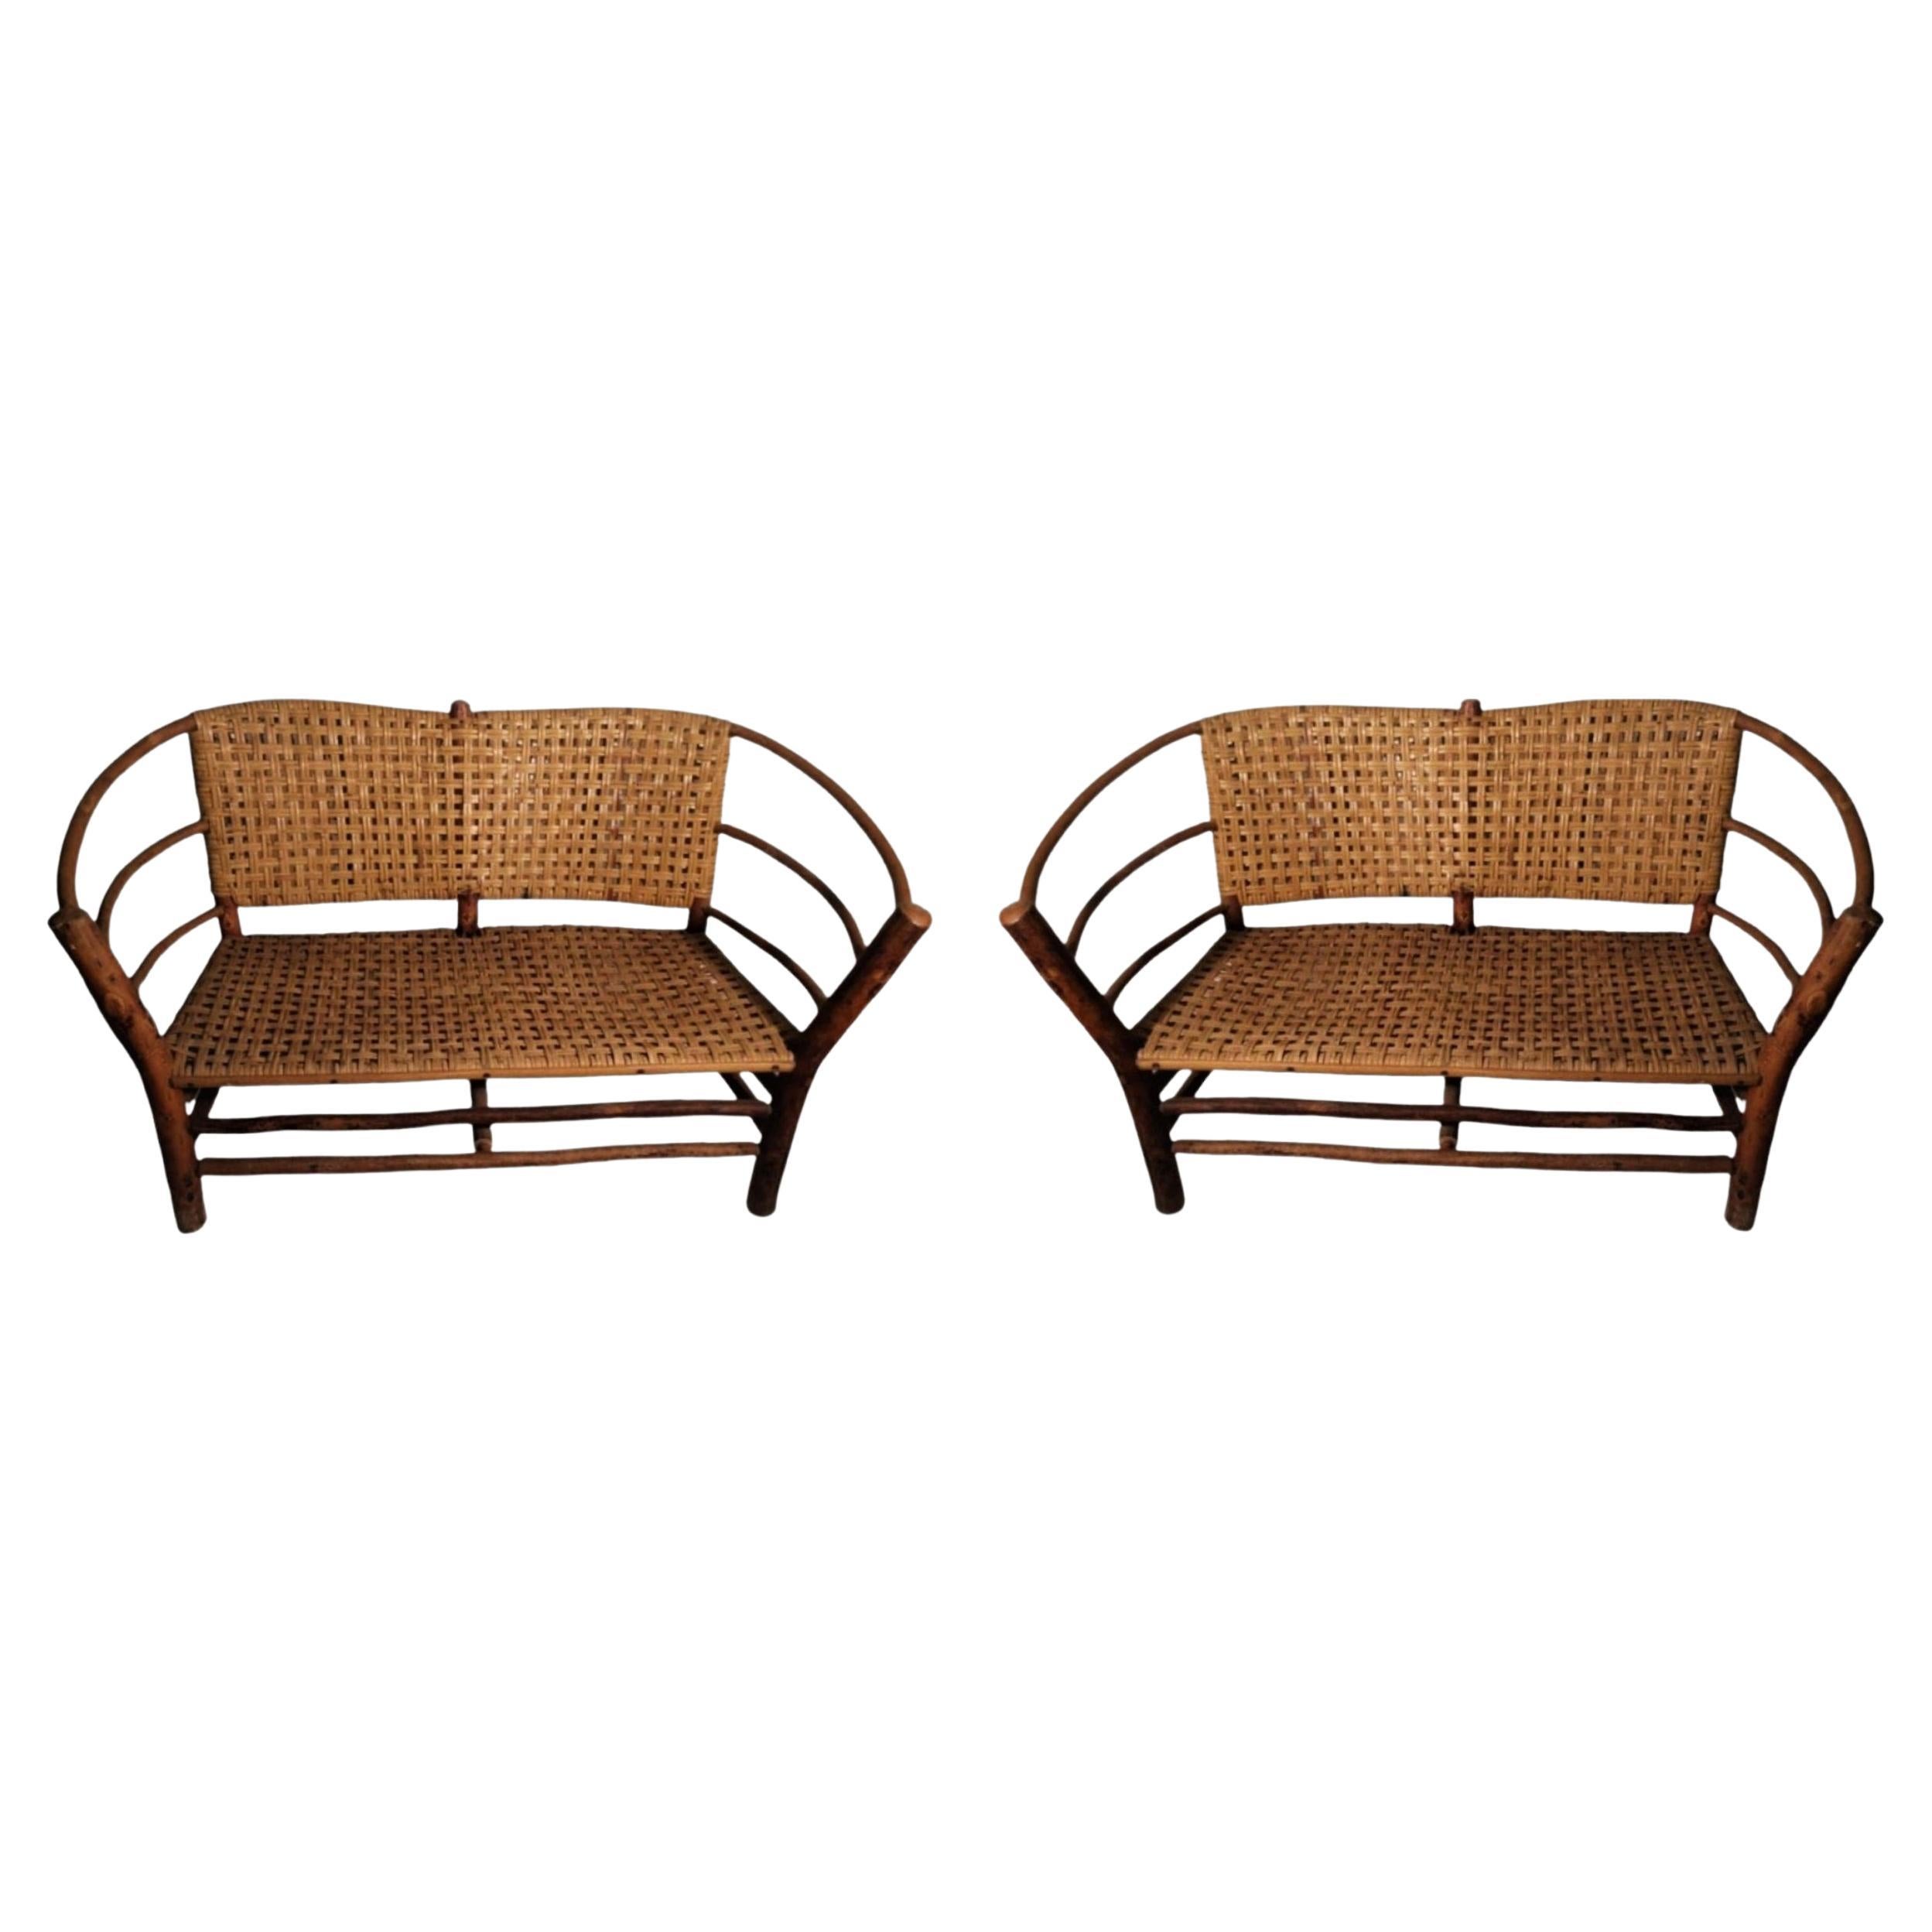 Pair of Marysville Old Hickory Settees